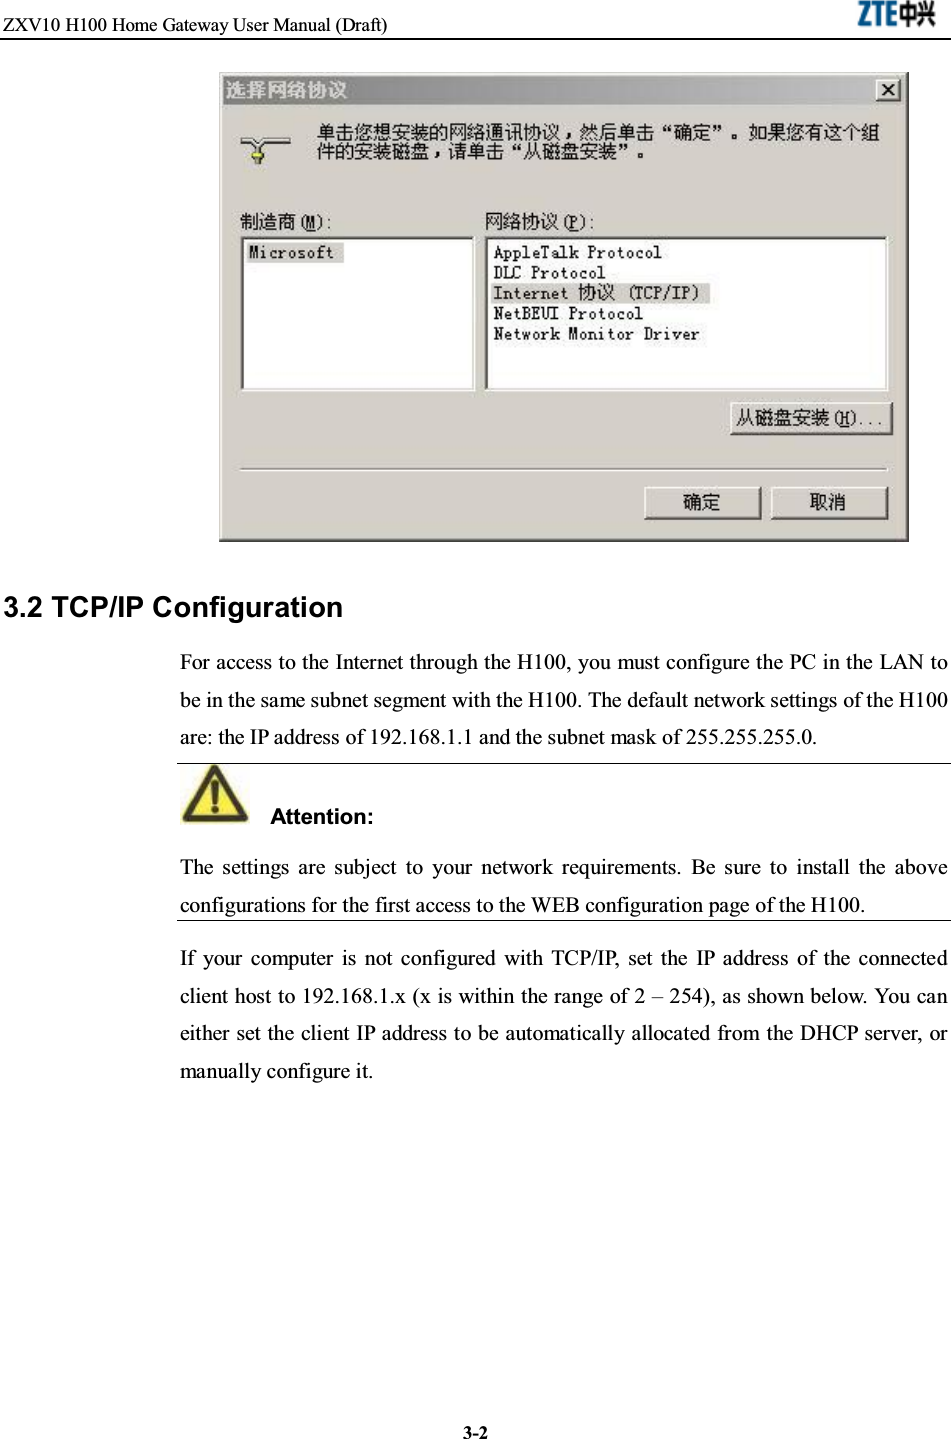 ZXV10 H100 Home Gateway User Manual (Draft)3-23.2 TCP/IP ConfigurationFor access to the Internet through the H100, you must configure the PC in the LAN tobe in the same subnet segment with the H100. The default network settings of the H100are: the IP address of 192.168.1.1 and the subnet mask of 255.255.255.0.Attention:The settings are subject to your network requirements. Be sure to install the aboveconfigurations for the first access to the WEB configuration page of the H100.If your computer is not configured with TCP/IP, set the IP address of the connectedclient host to 192.168.1.x (x is within the range of 2 – 254), as shown below. You caneither set the client IP address to be automatically allocated from the DHCP server, ormanually configure it.